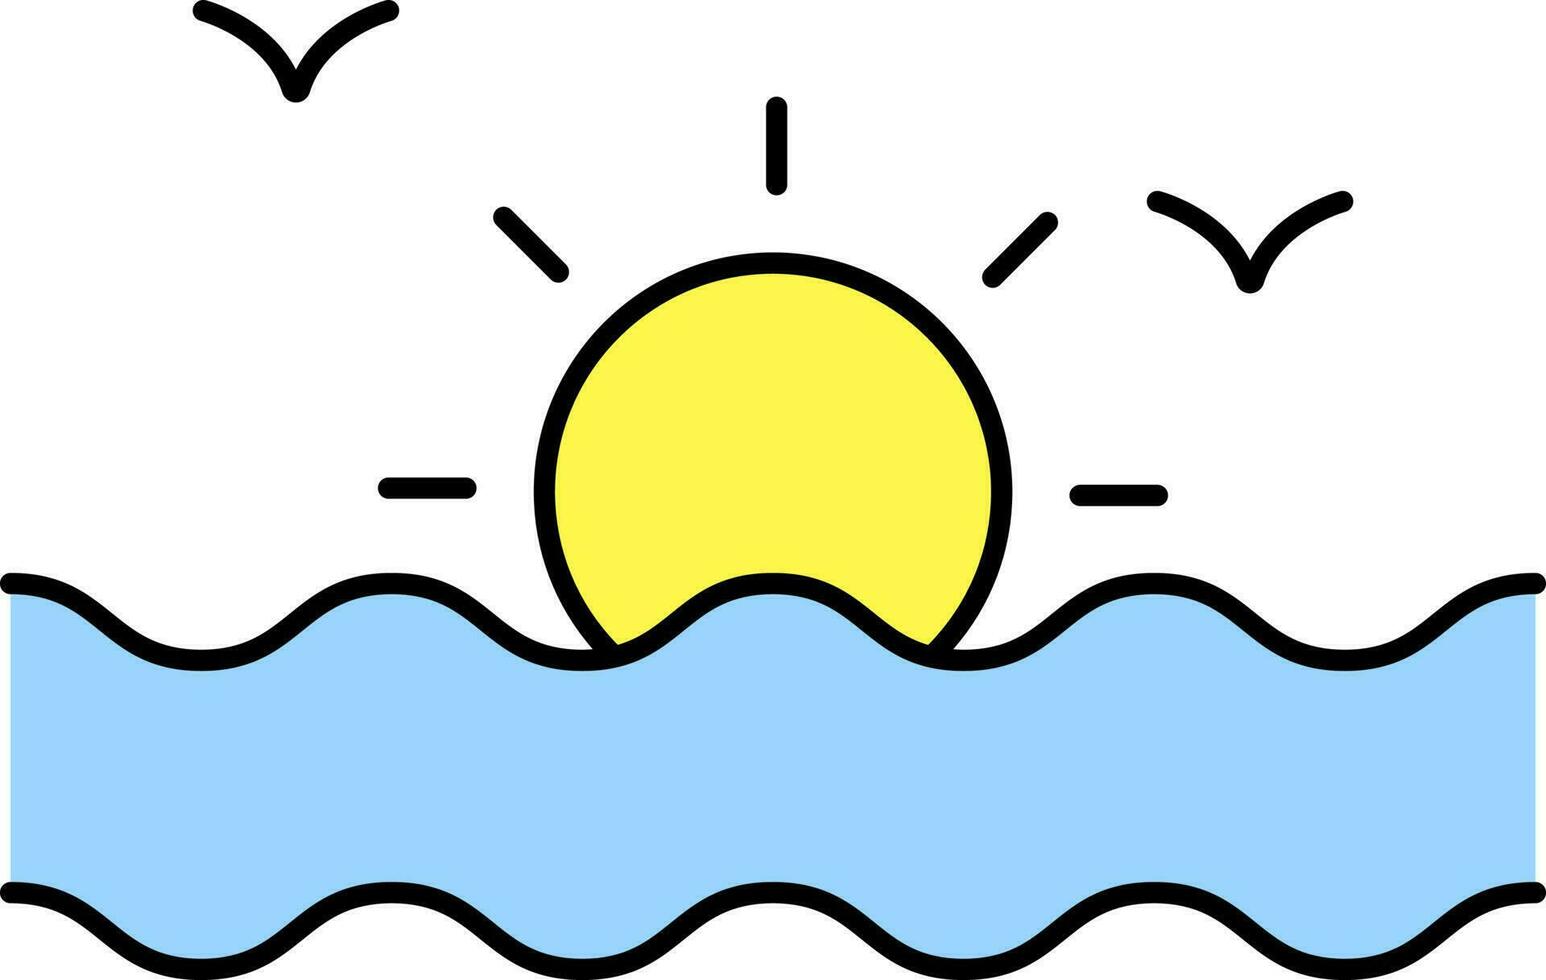 Sunrise Or Sunset At Sea Icon In Blue And Yellow Color. vector